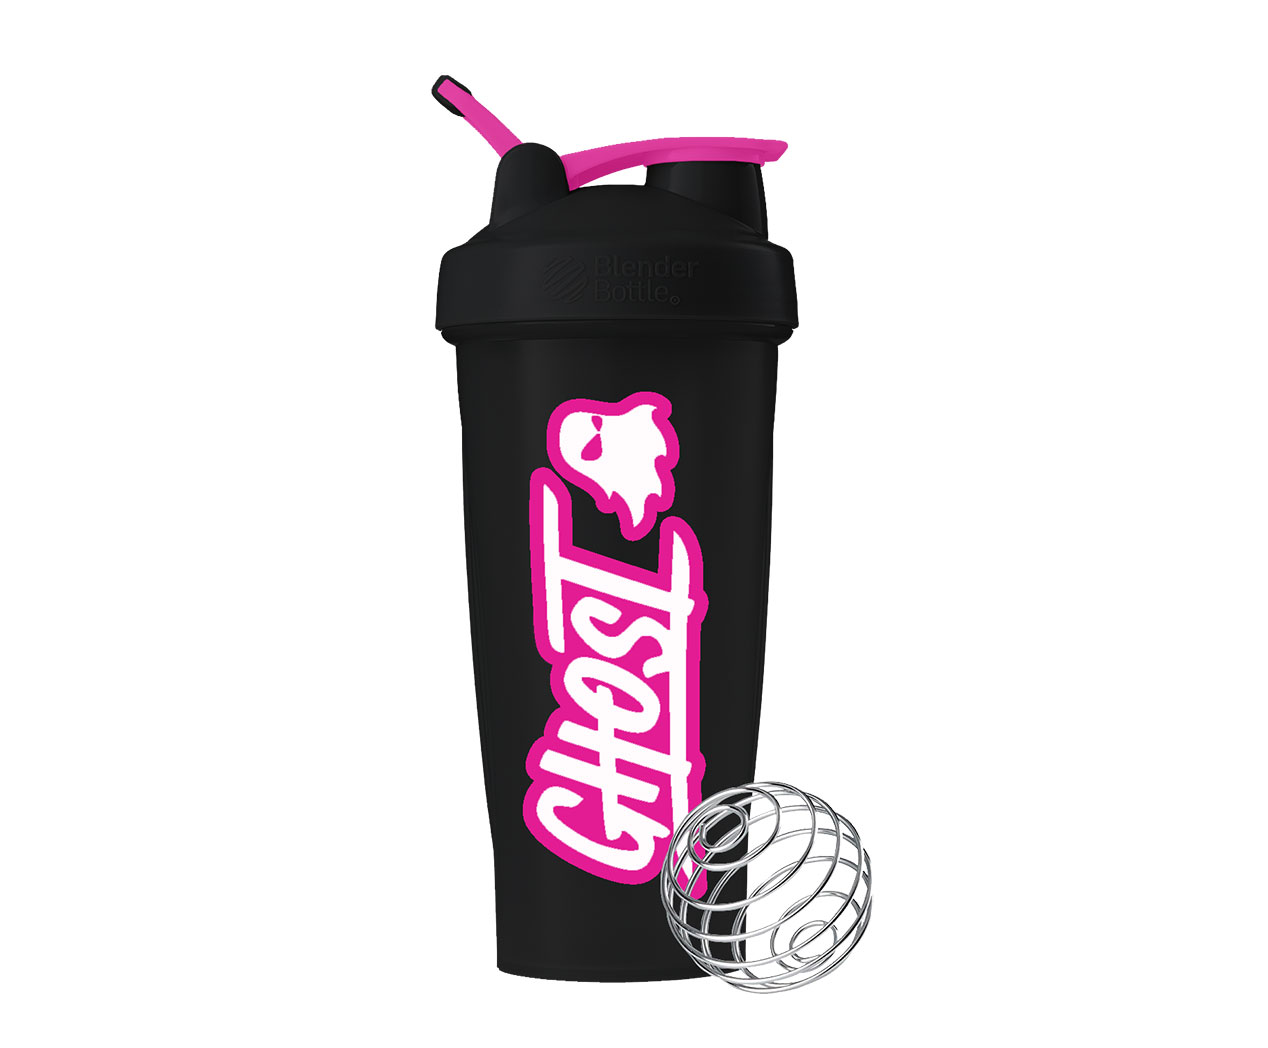 Limited Hyper Pink Ghost shaker in support of Breast Cancer Awareness